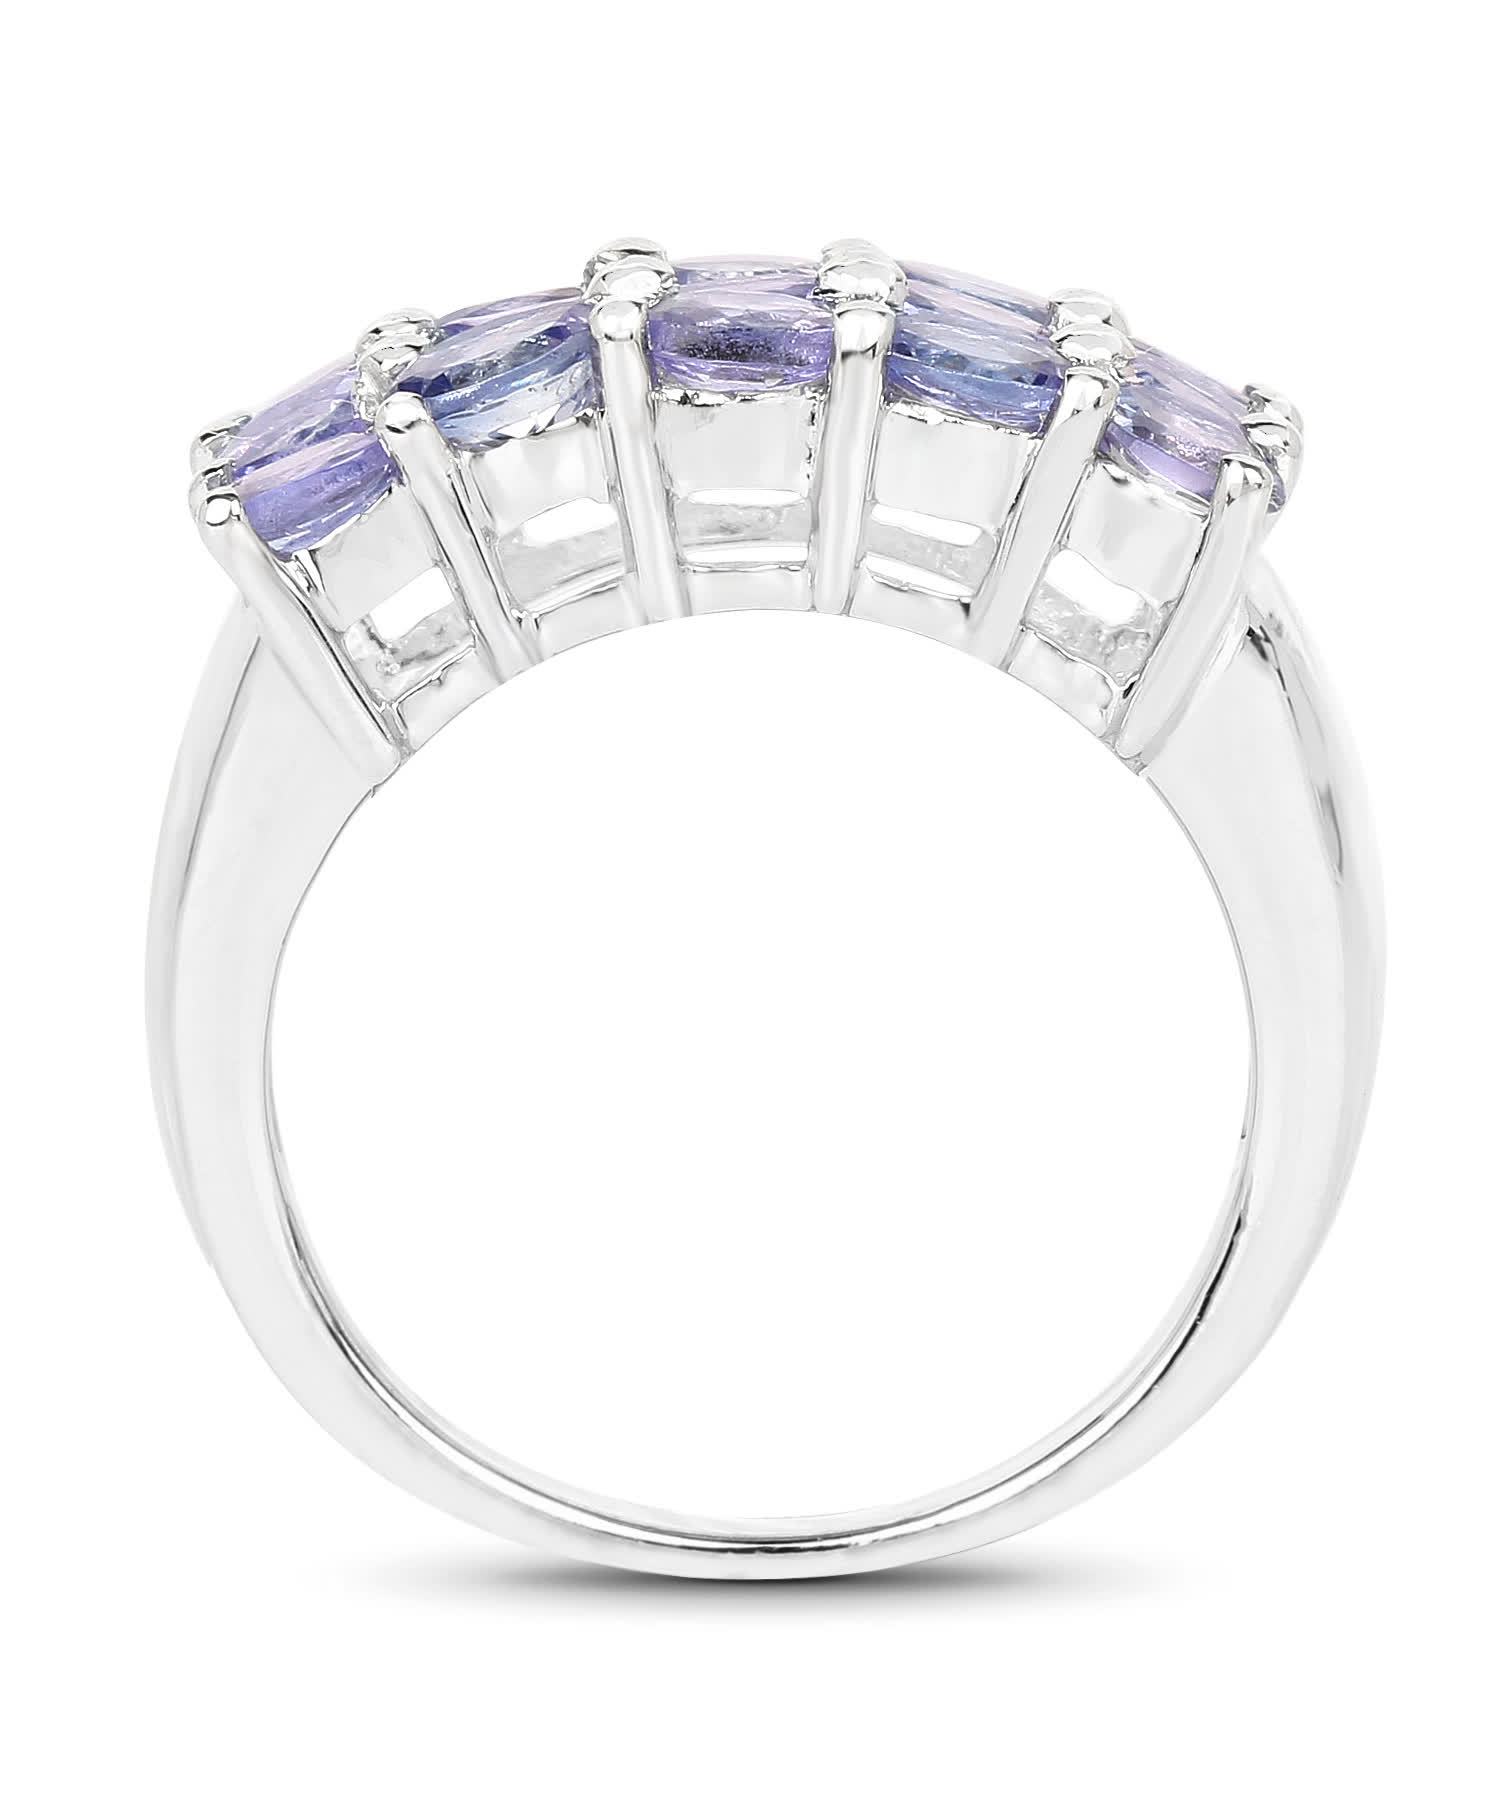 2.55ctw Natural Tanzanite Rhodium Plated 925 Sterling Silver Ring View 2